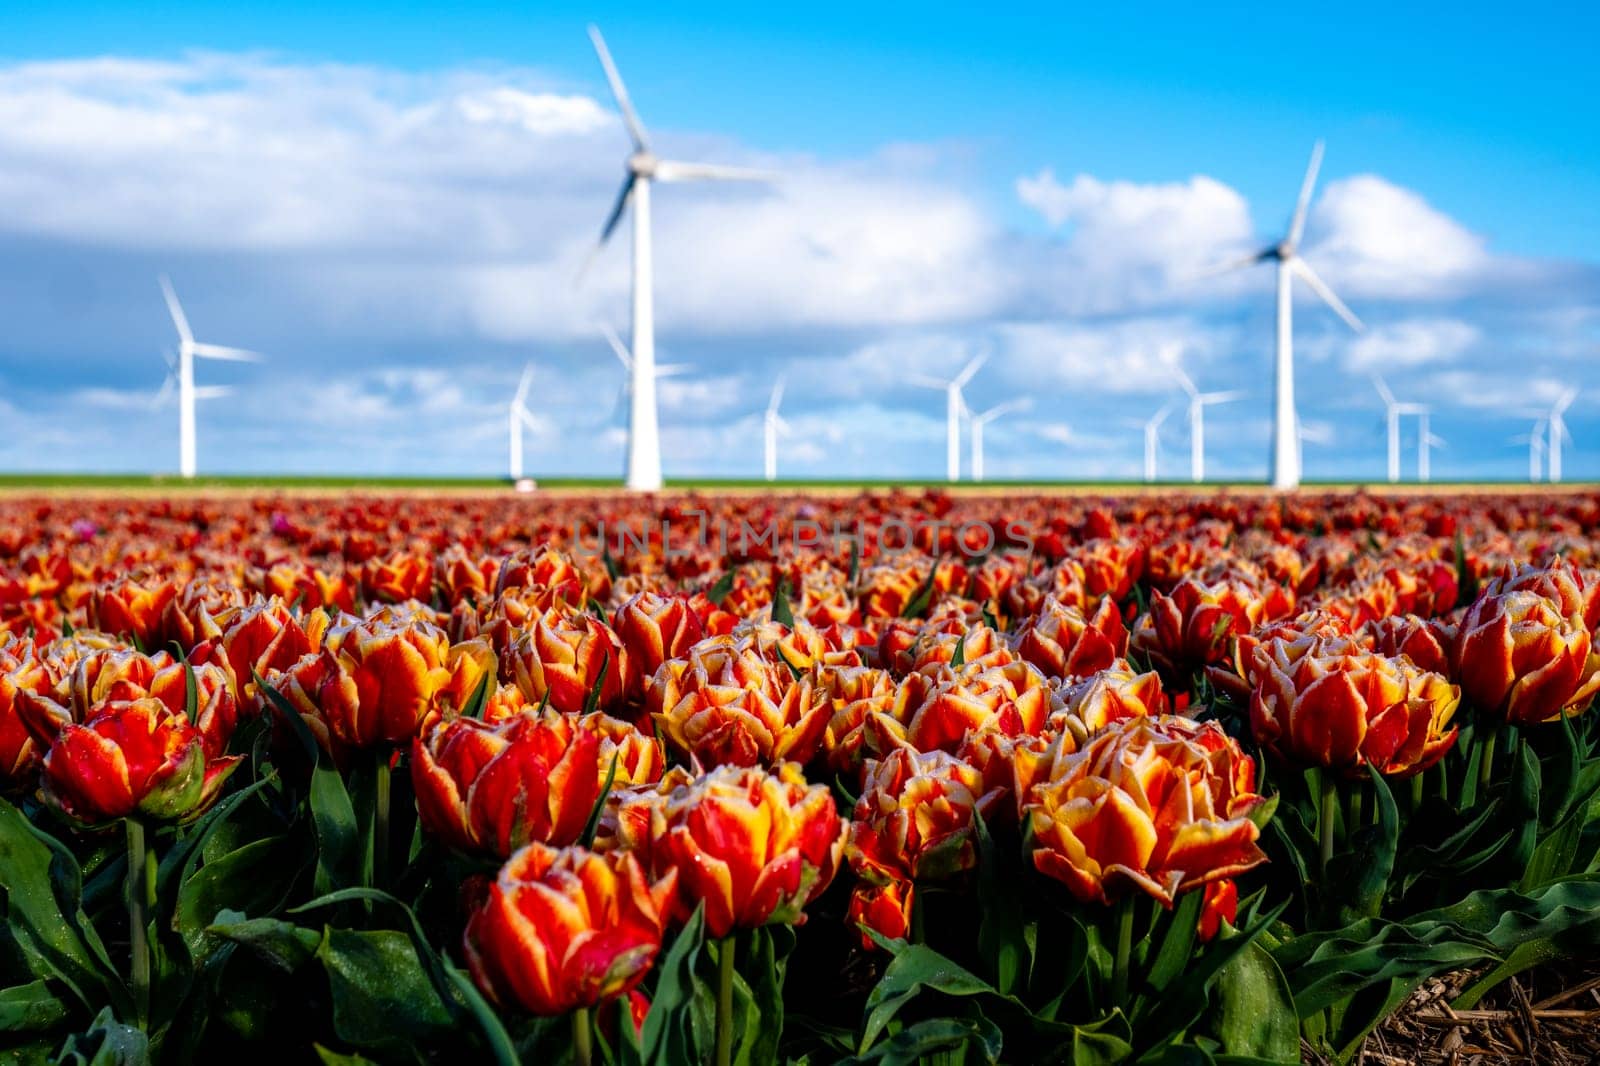 A vibrant field of red and yellow tulips swaying gently in the wind, with traditional windmill turbines towering in the background against a clear blue sky by fokkebok